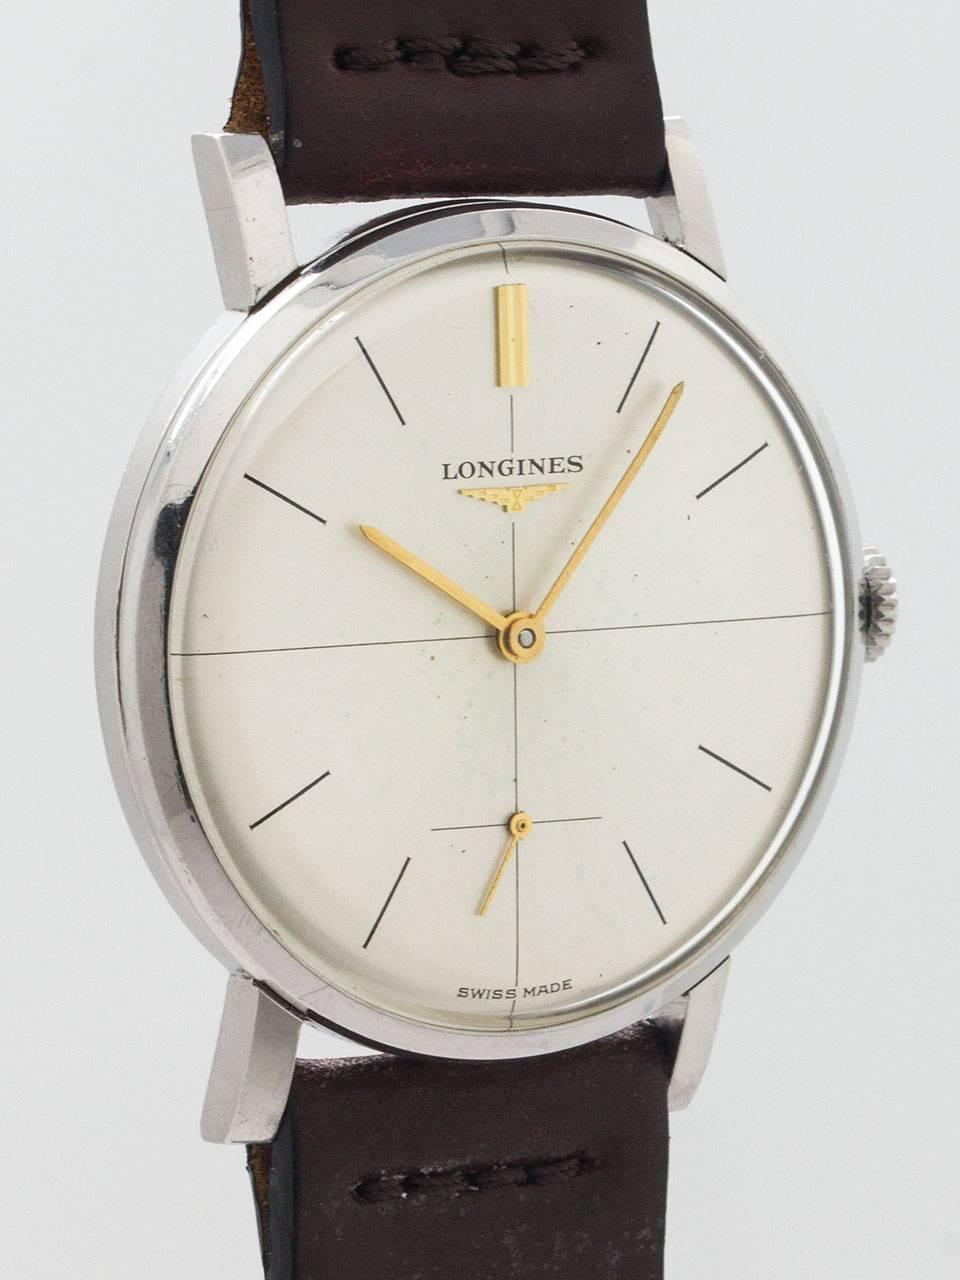 Very minty condition vintage Longines Dress Model ref 8903 circa 1960s. Featuring never polished stainless steel 35mm diameter case with snap down back, sloped bezel and straight extended lugs. With mint condition original “post moderne” minimalist